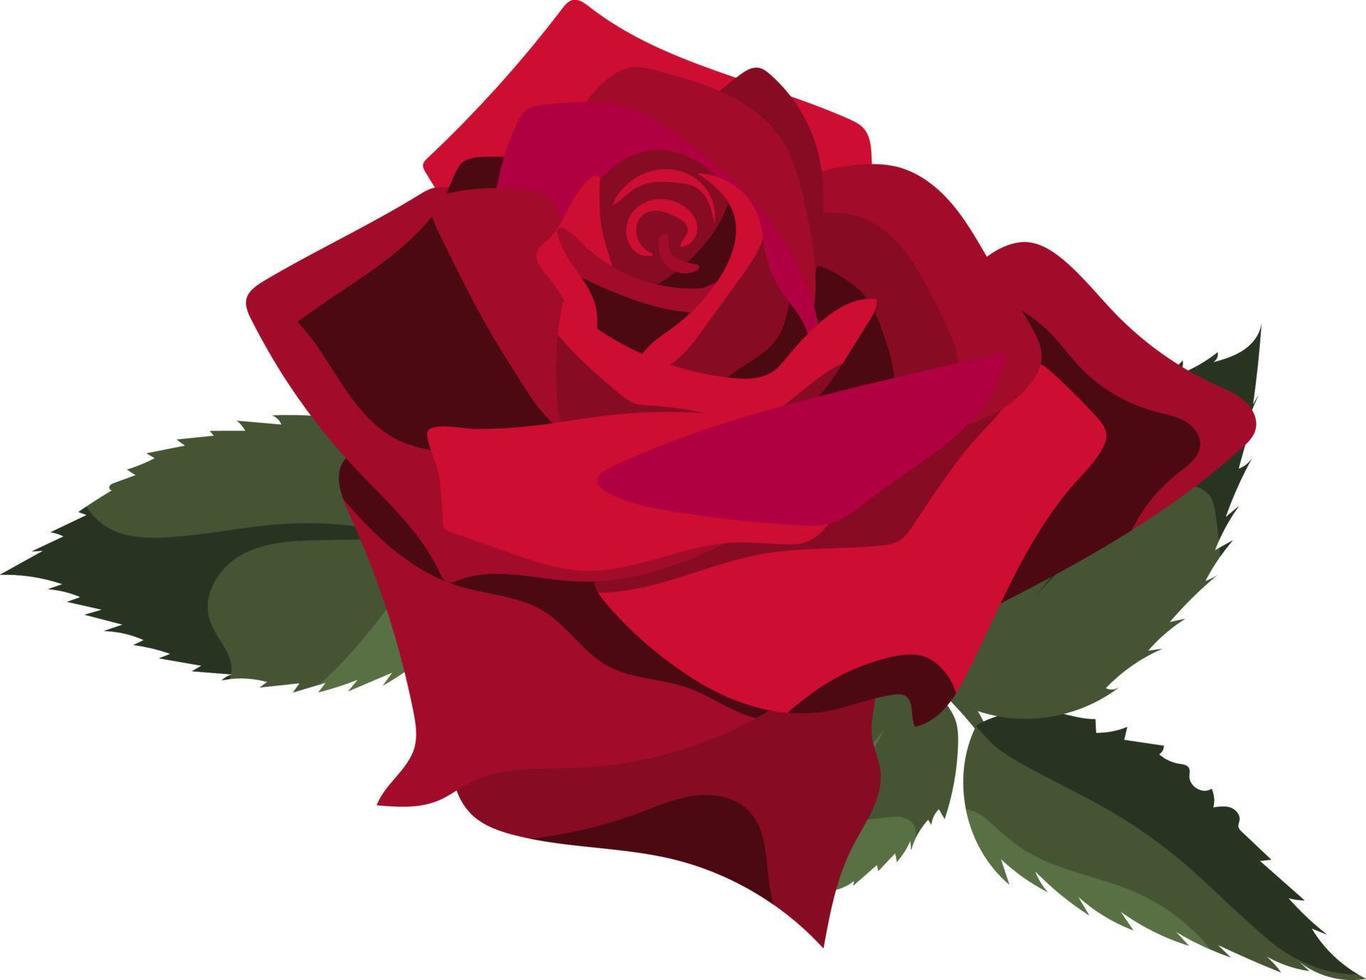 Single lush red rose with green leaves, isolated on white background vector